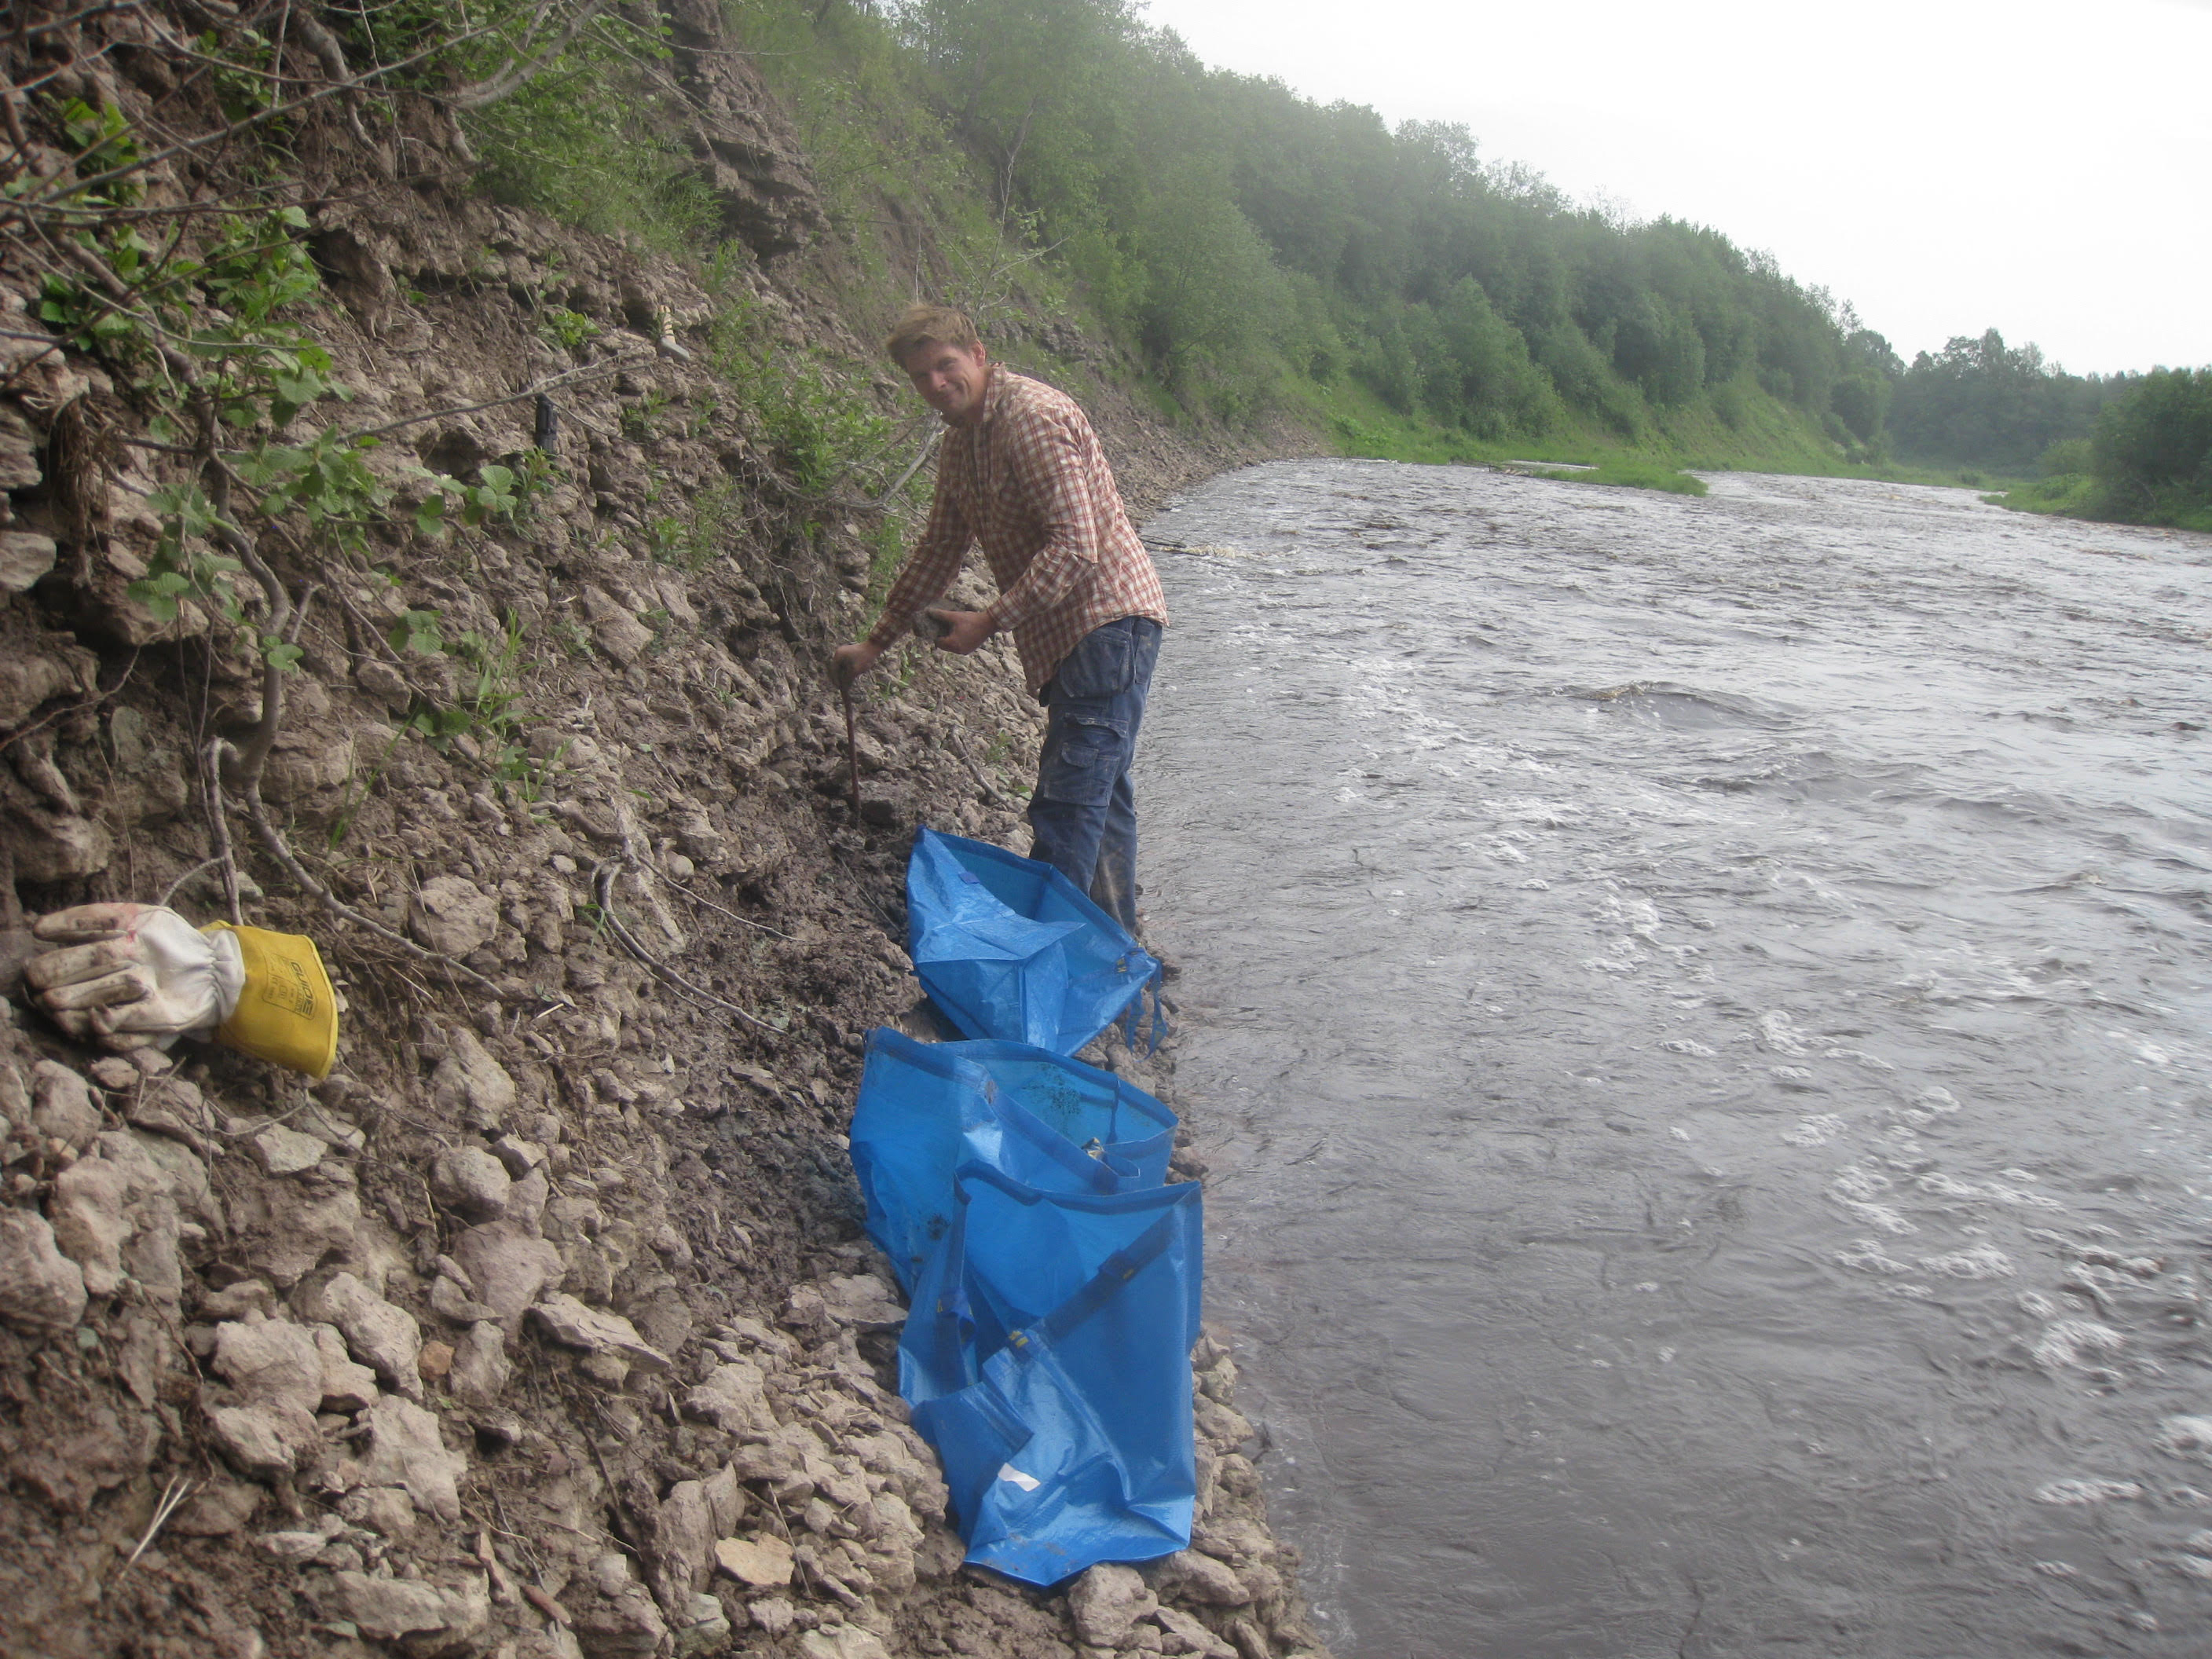 One of Heck's co-authors collecting rocks containing ancient micrometeorites from the bed of the Lynna River in Russia. Photo by Birger Schmitz, Lund University.